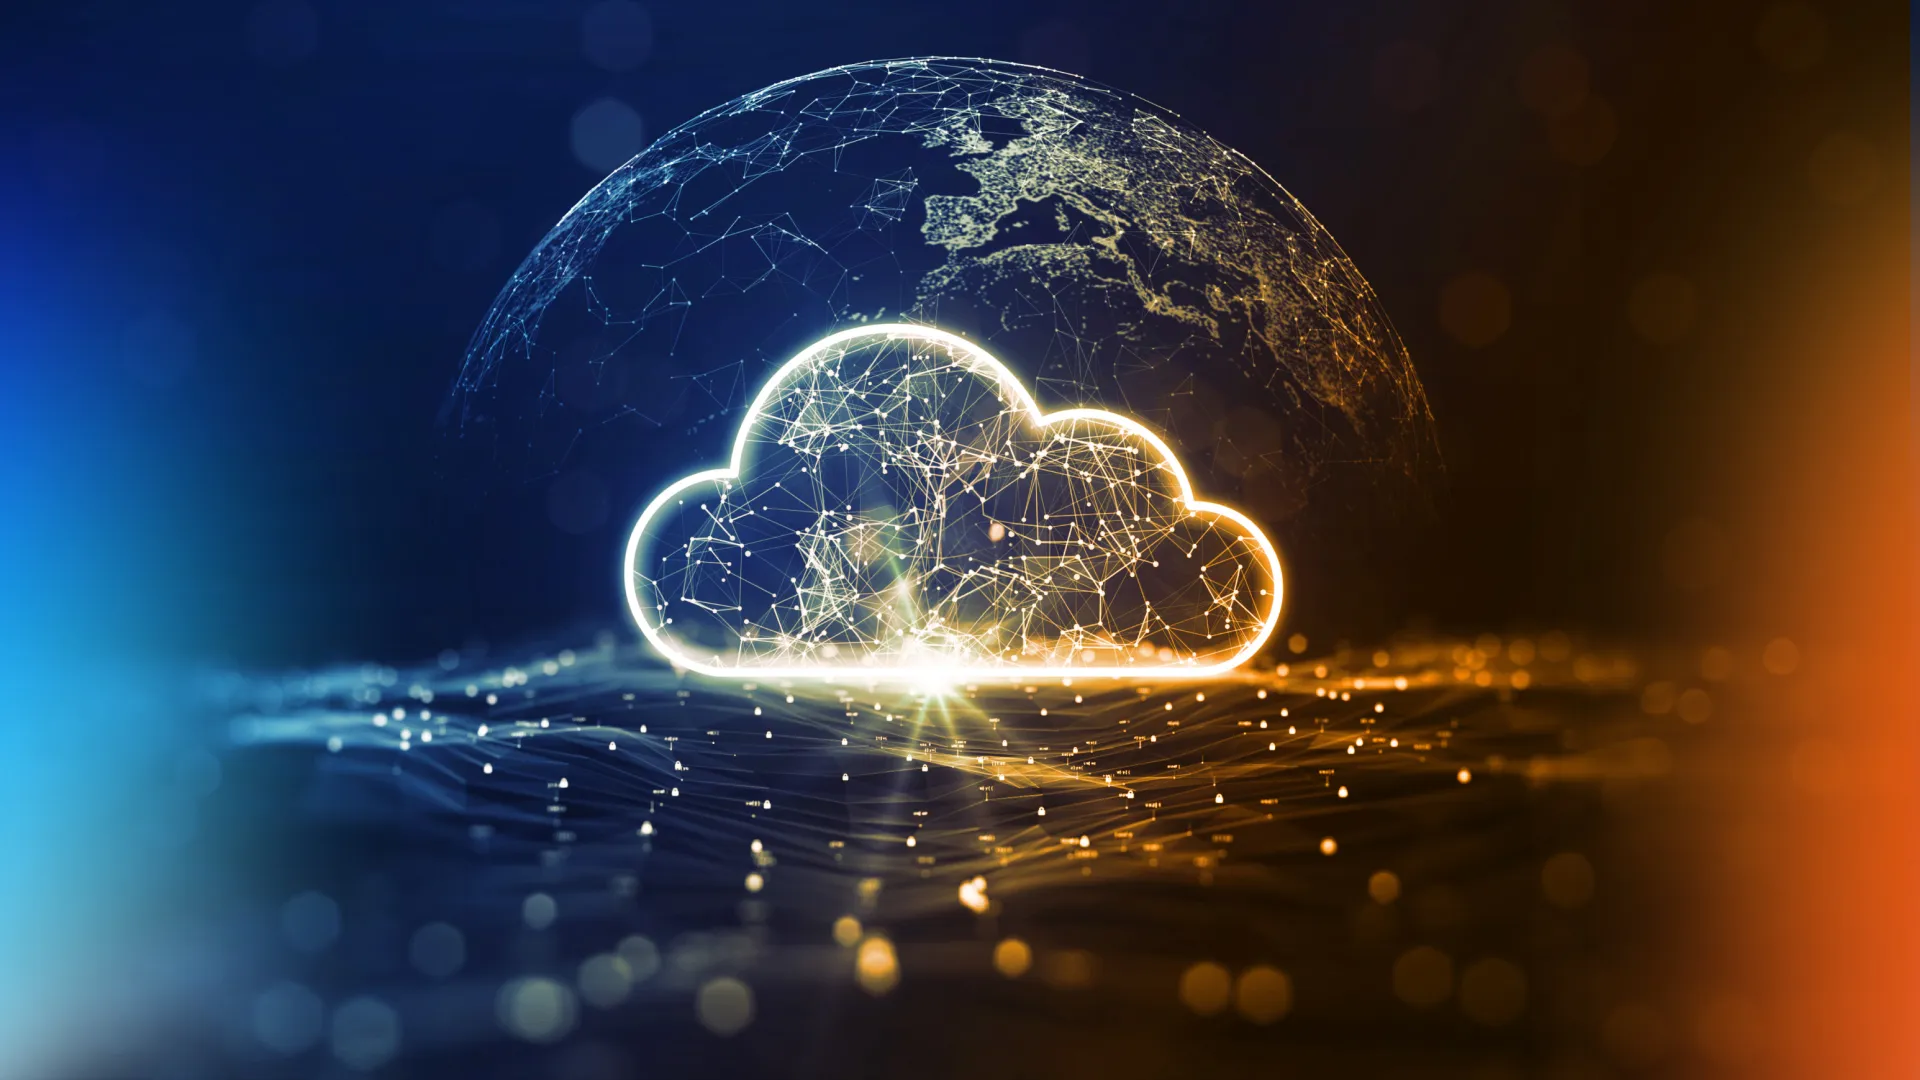 VAST Data Simplifies and Secures Hybrid Cloud Data Management While Delivering up to 80 Percent Cost Savings on AWS Cloud